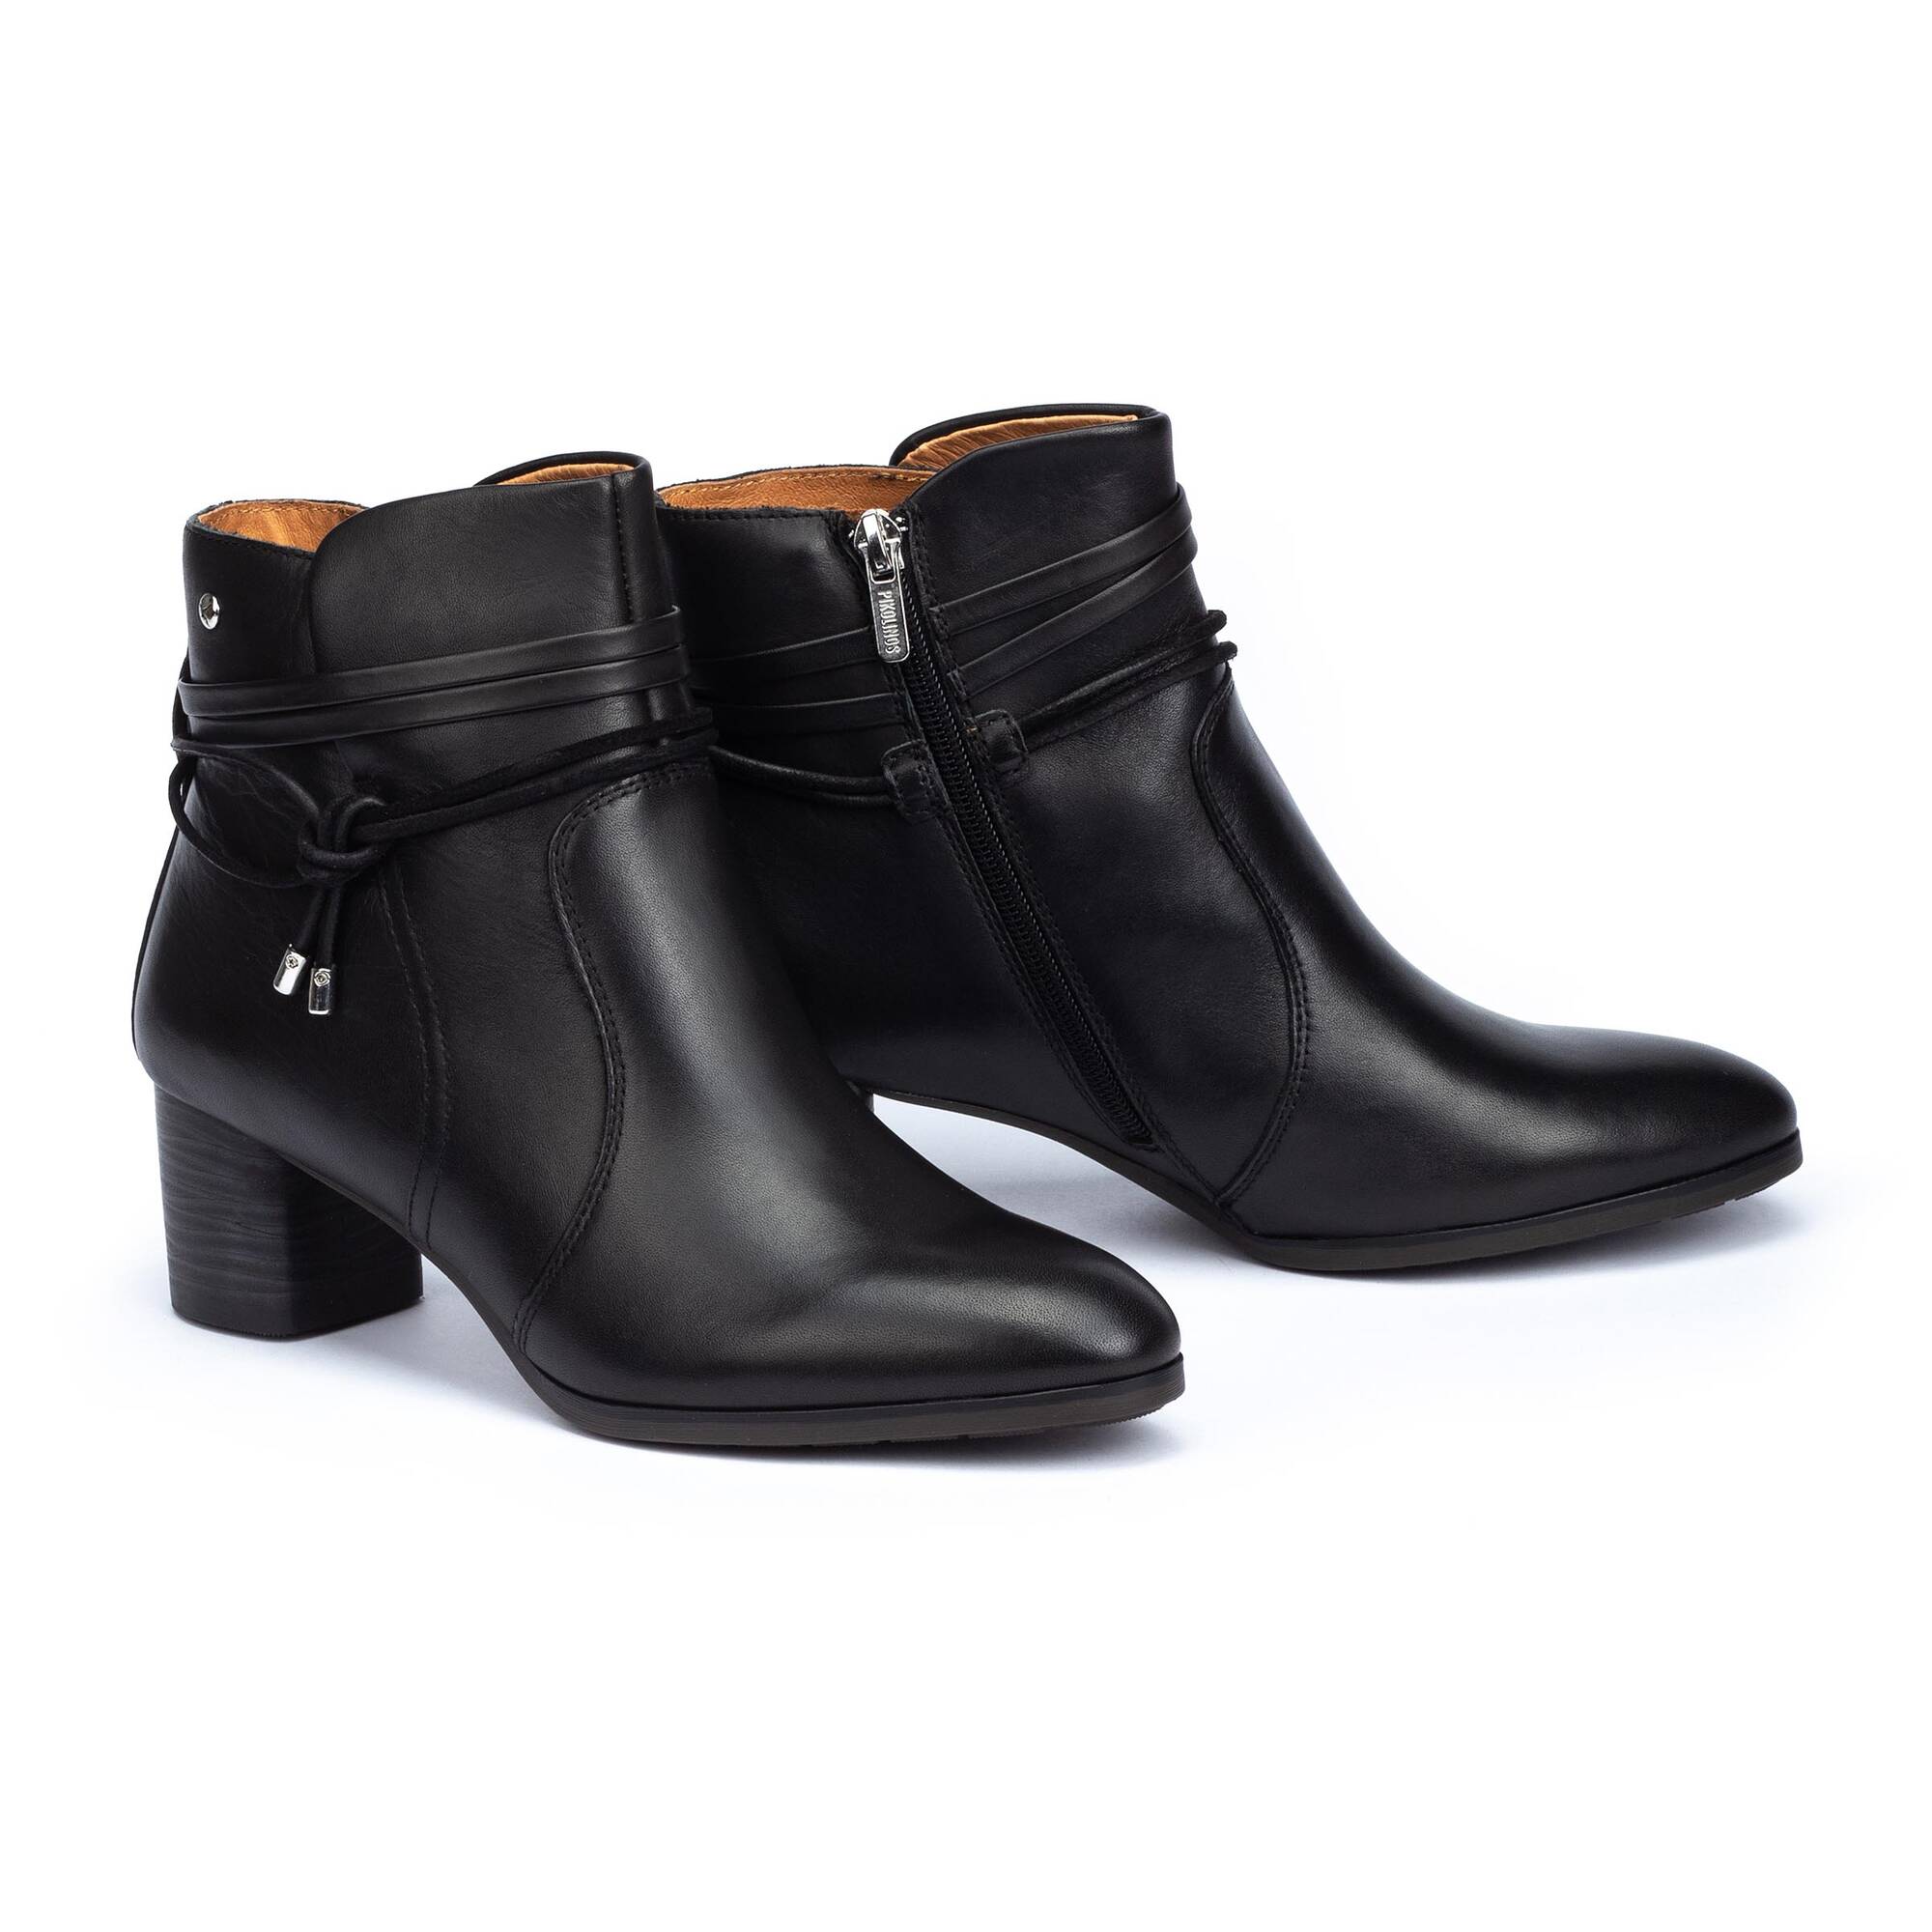 Ankle boots | CALAFAT W1Z-8635C1, BLACK, large image number 100 | null